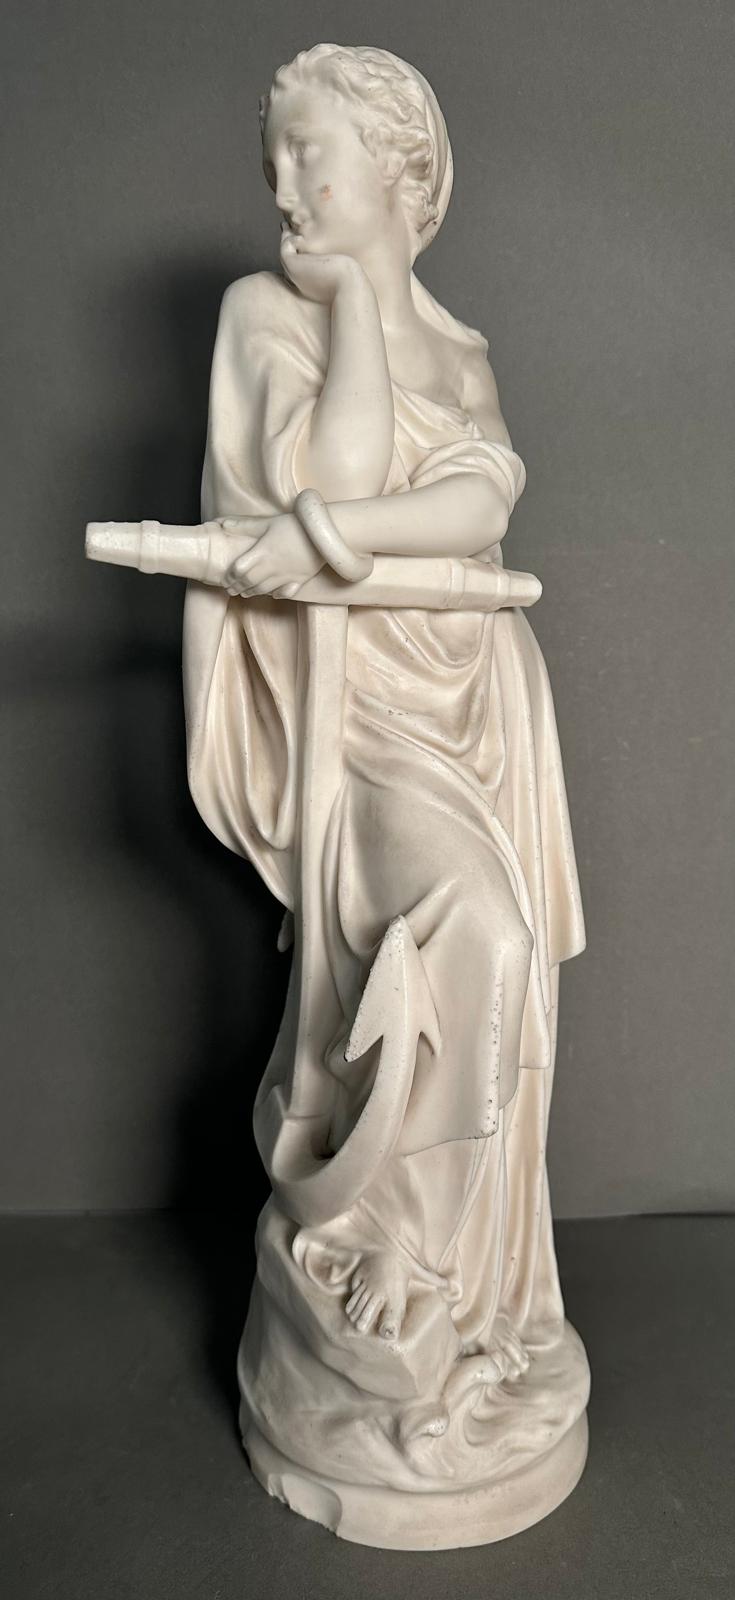 A statue of a classical figure resting on an anchor, approximate 45cm.